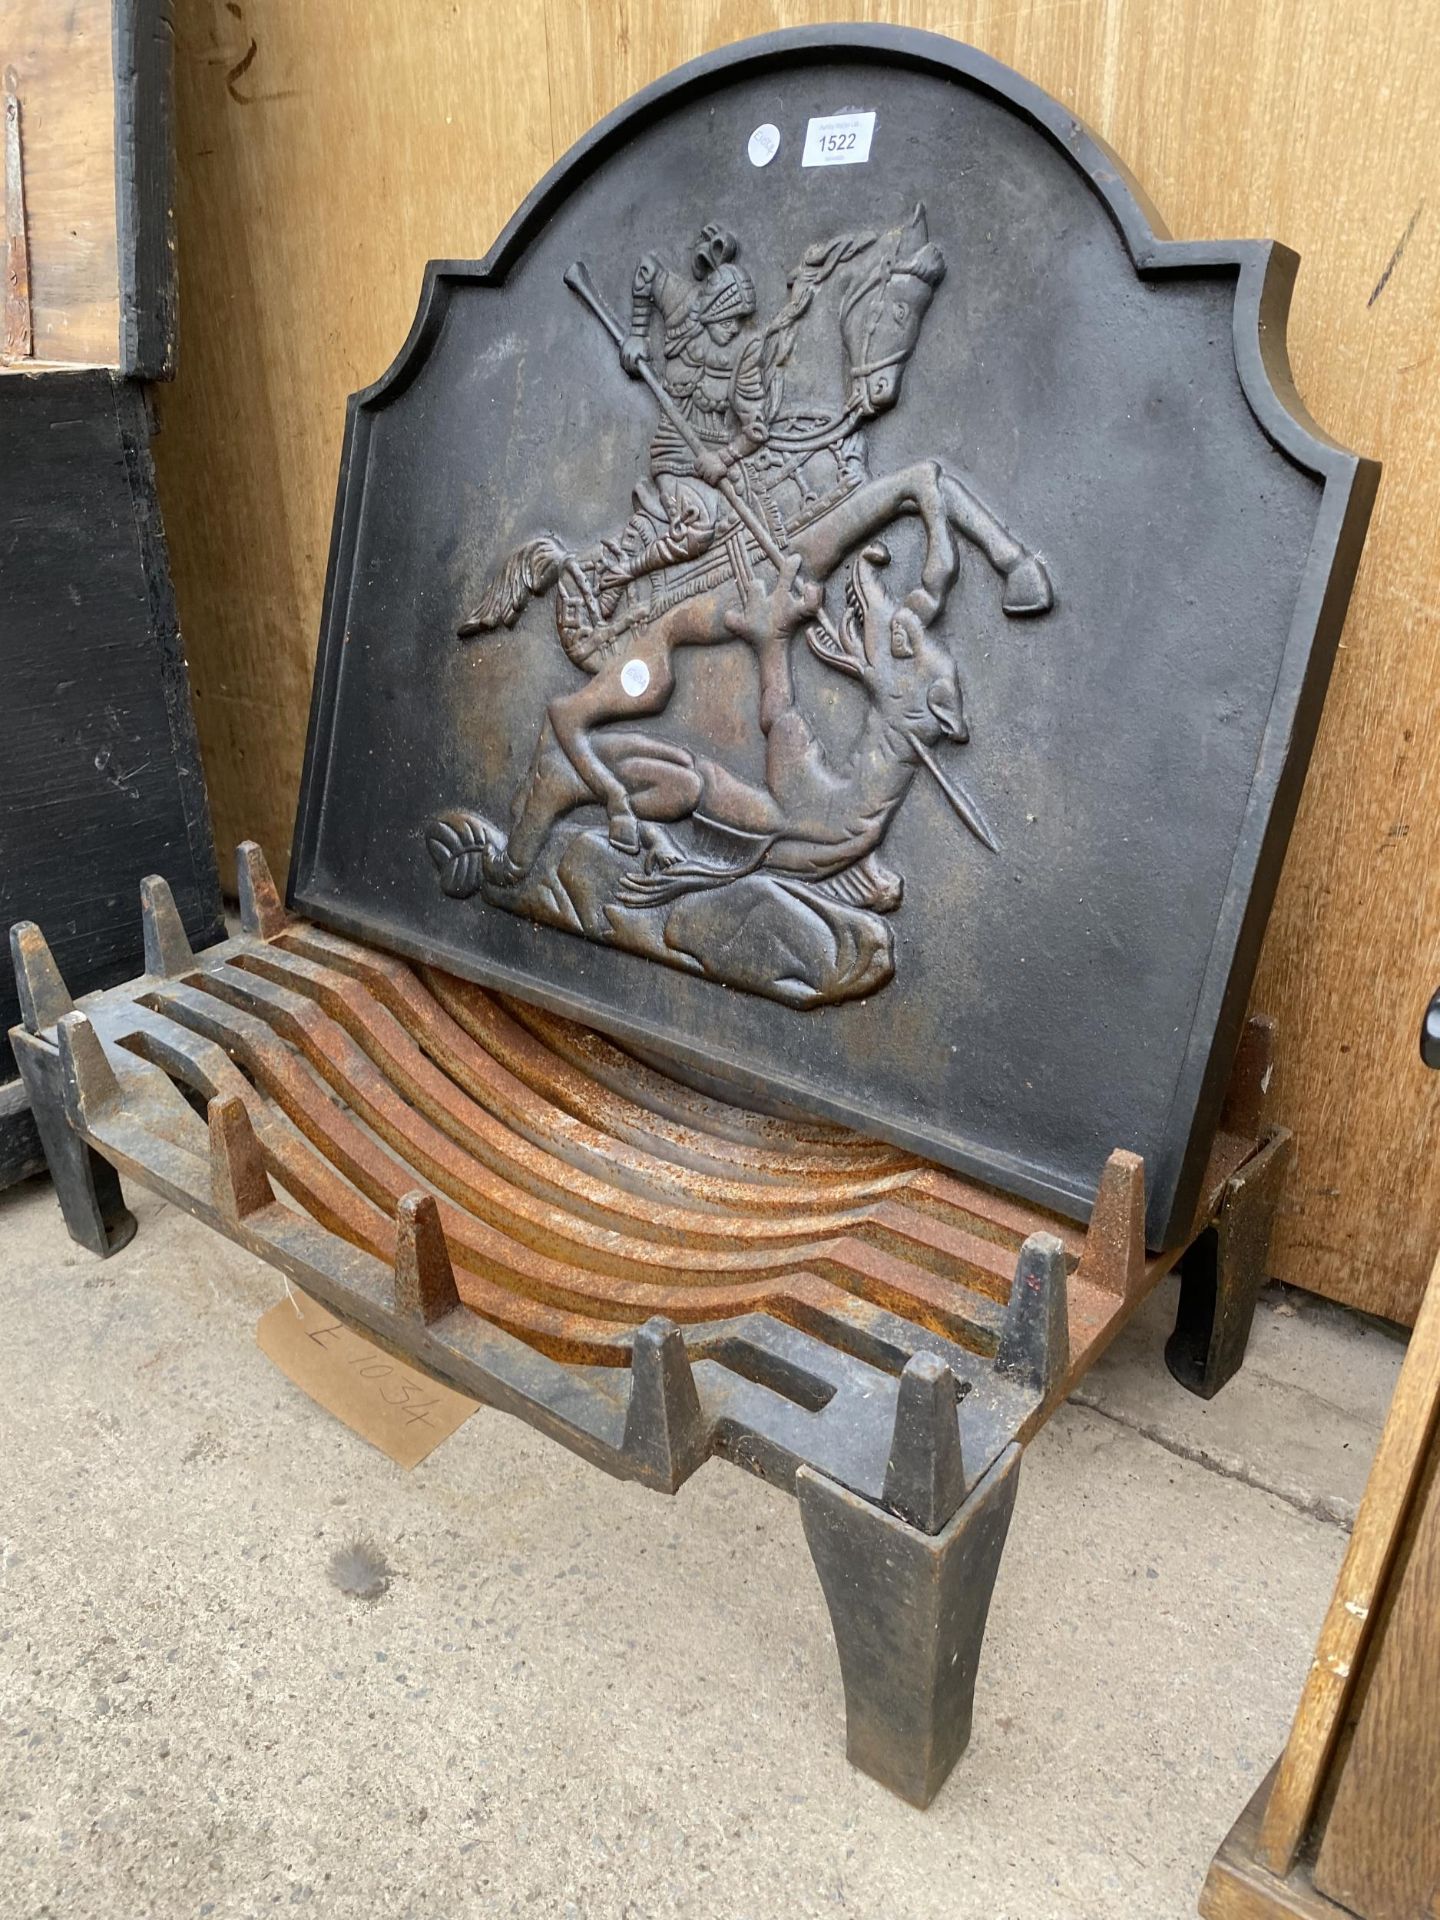 A LARGE FIRE GRATE AND A DECORATIVE CAST IRON FIRE BACK - Image 2 of 3